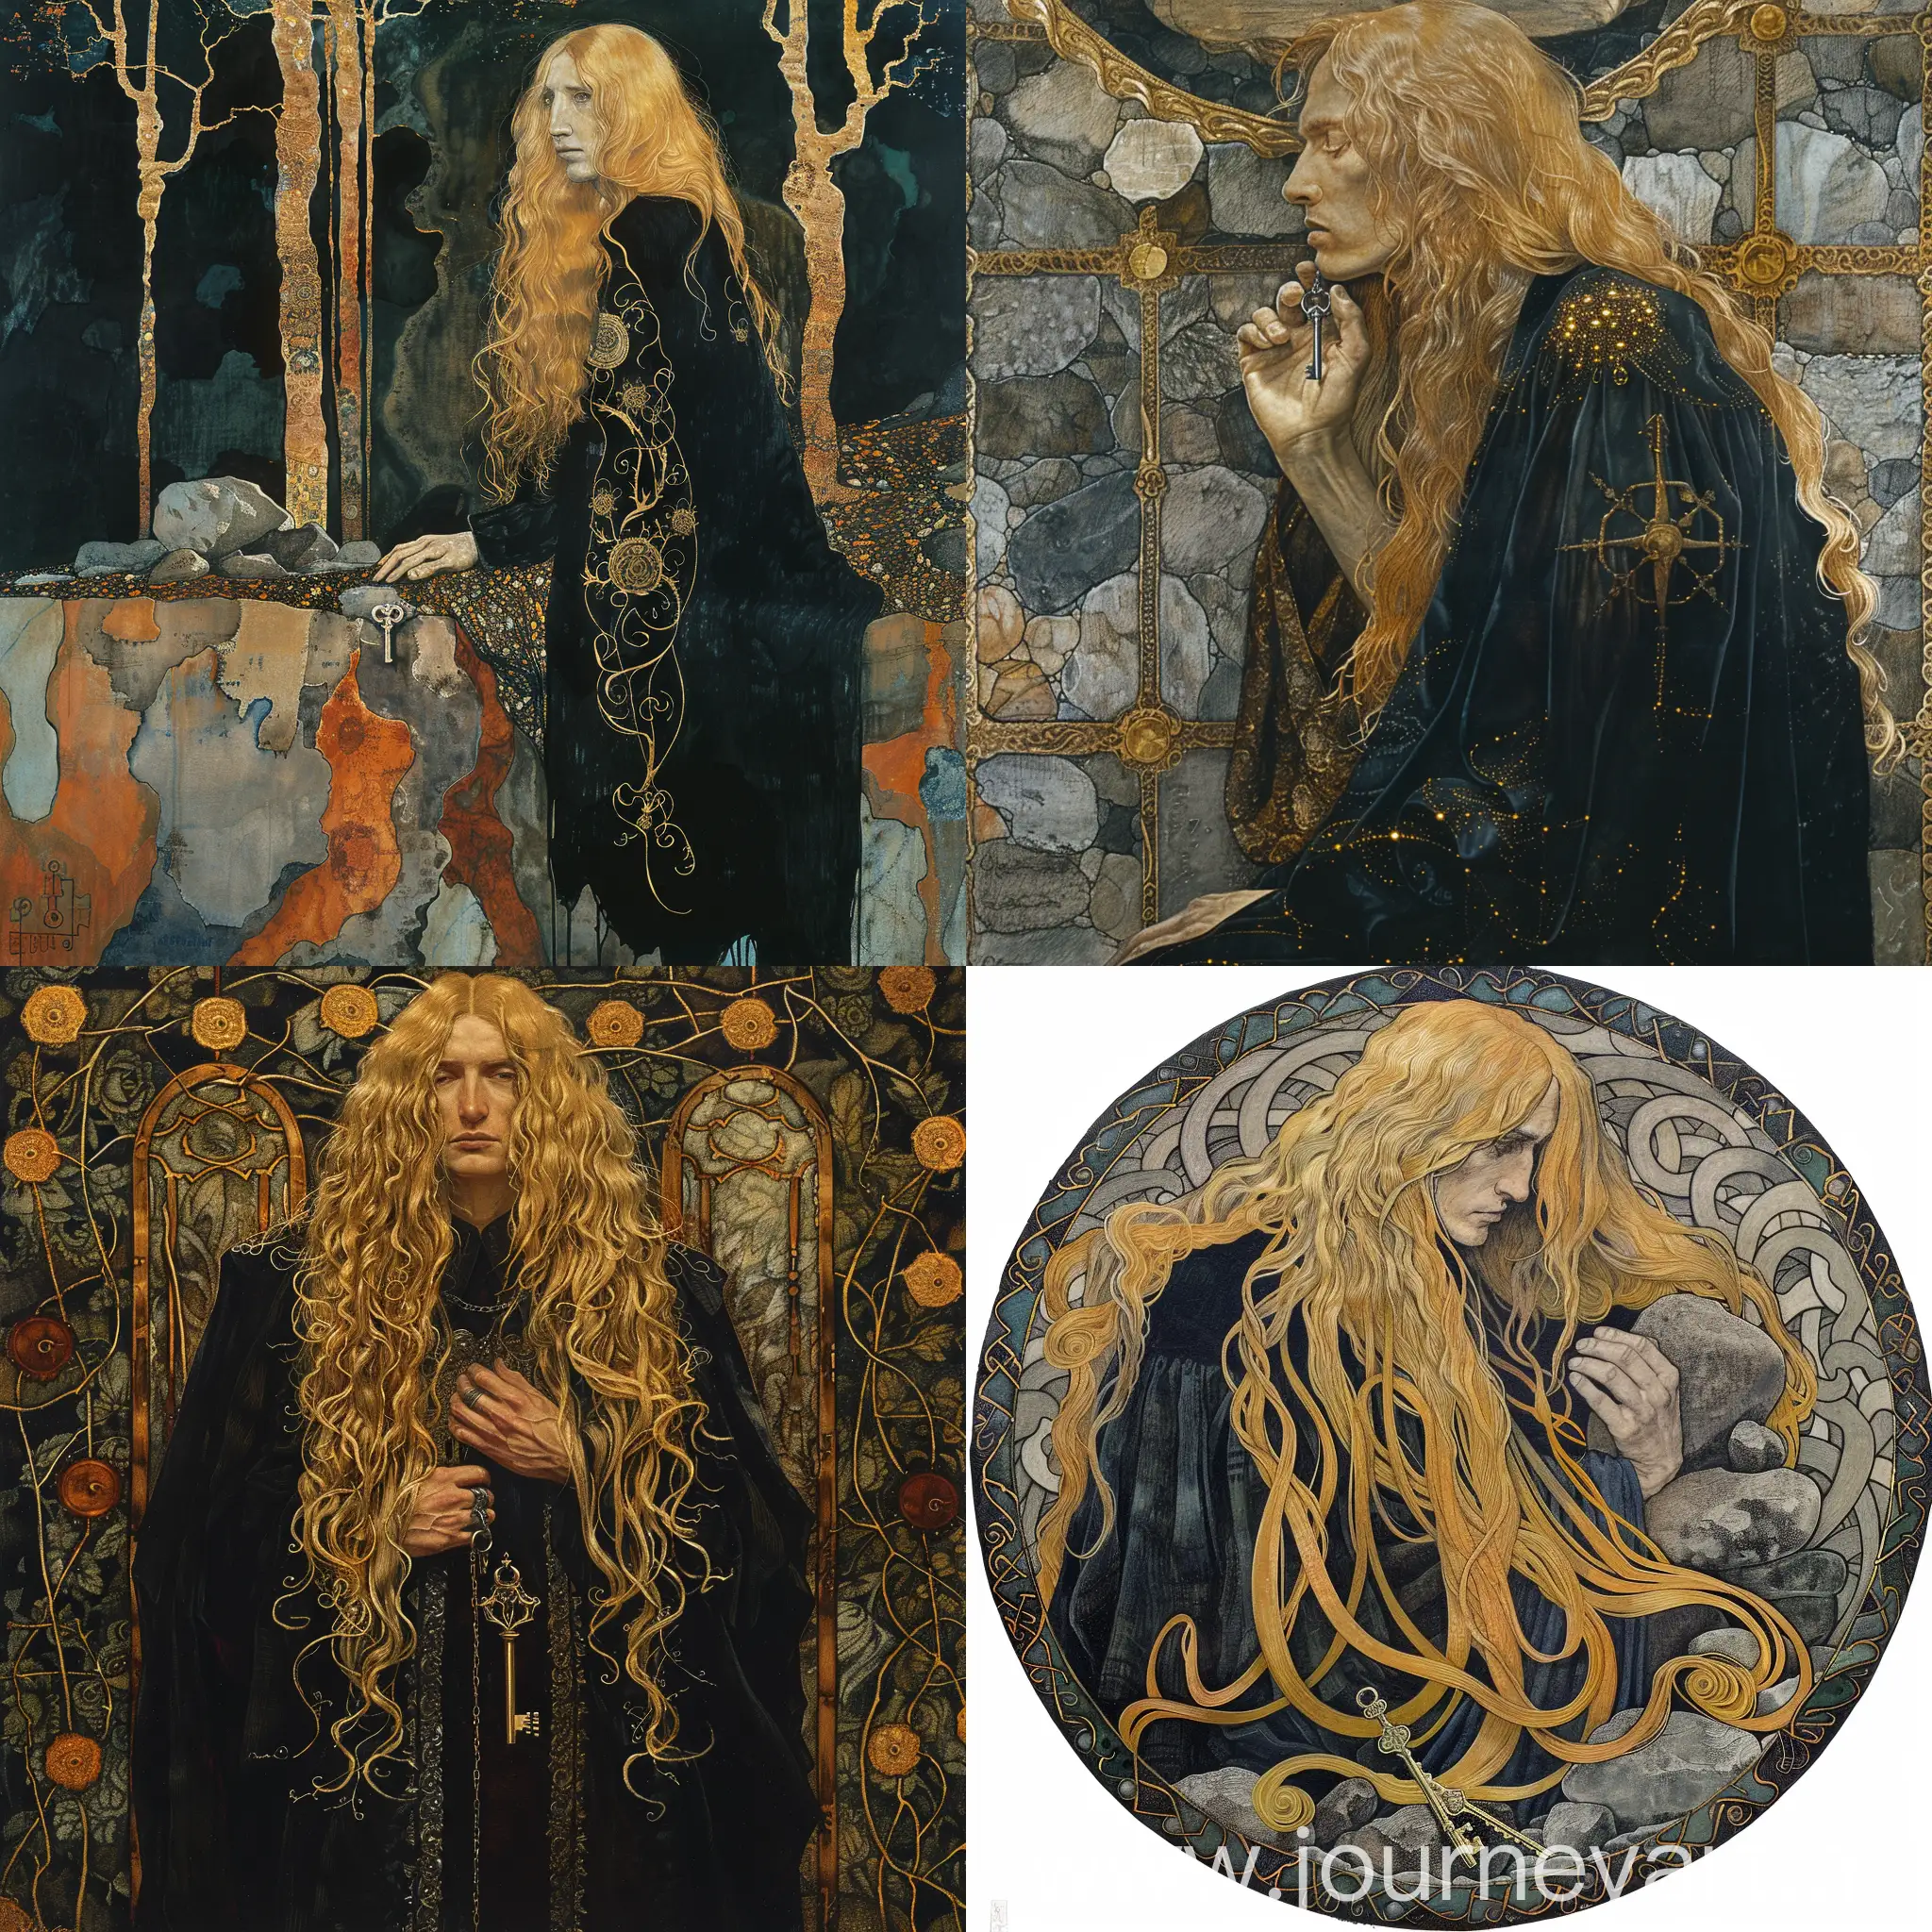 GoldenHaired-Man-in-Black-Mantle-with-Keys-and-Rocks-Art-Nouveau-Style